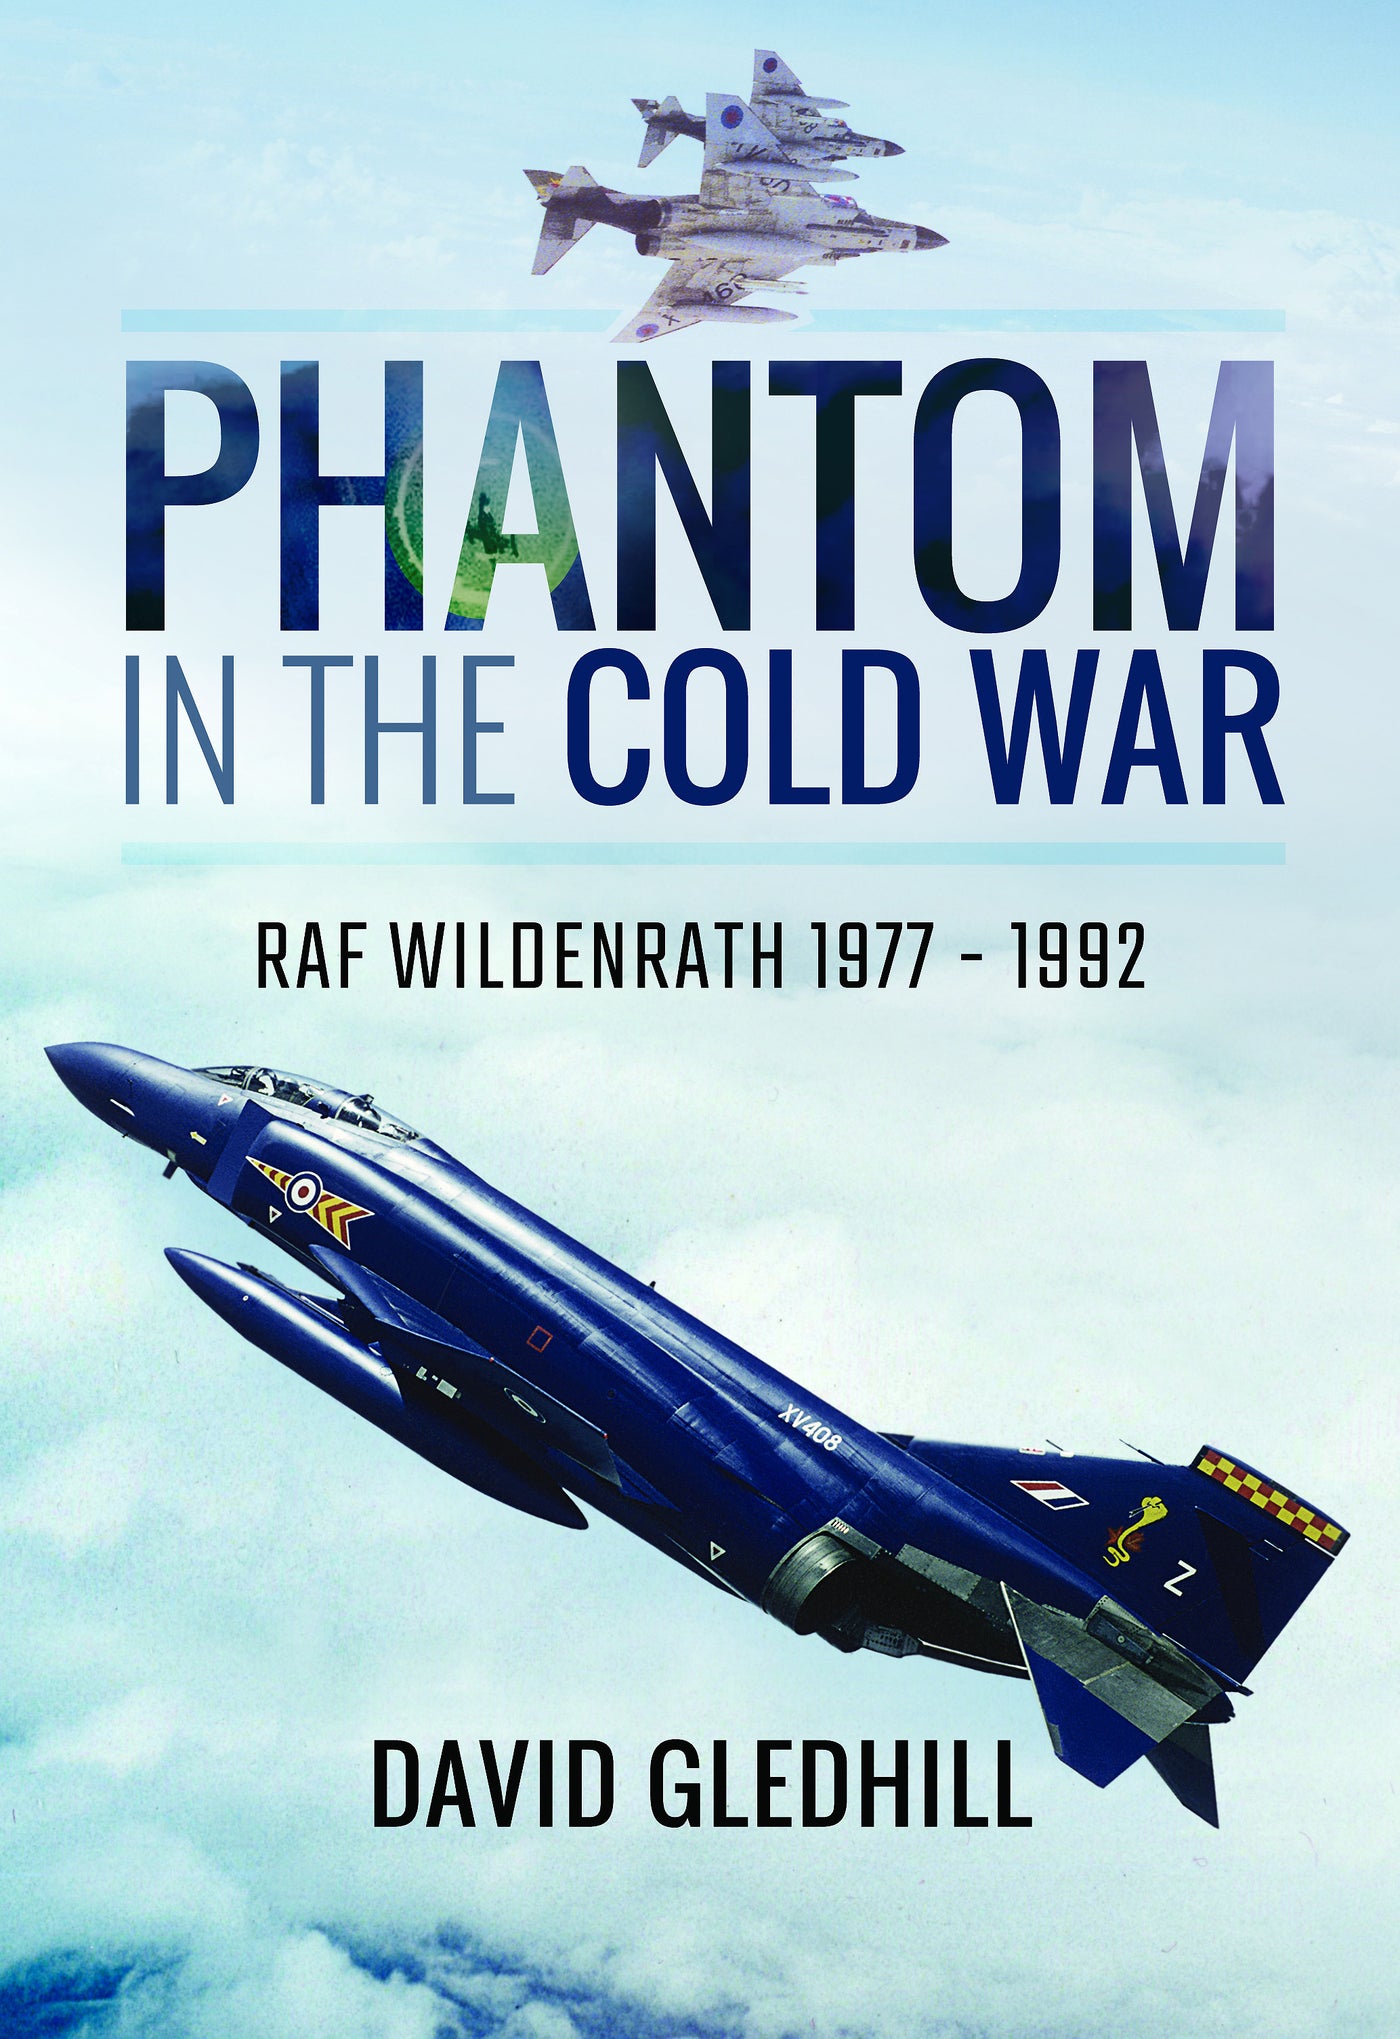 Phantom in the Cold War